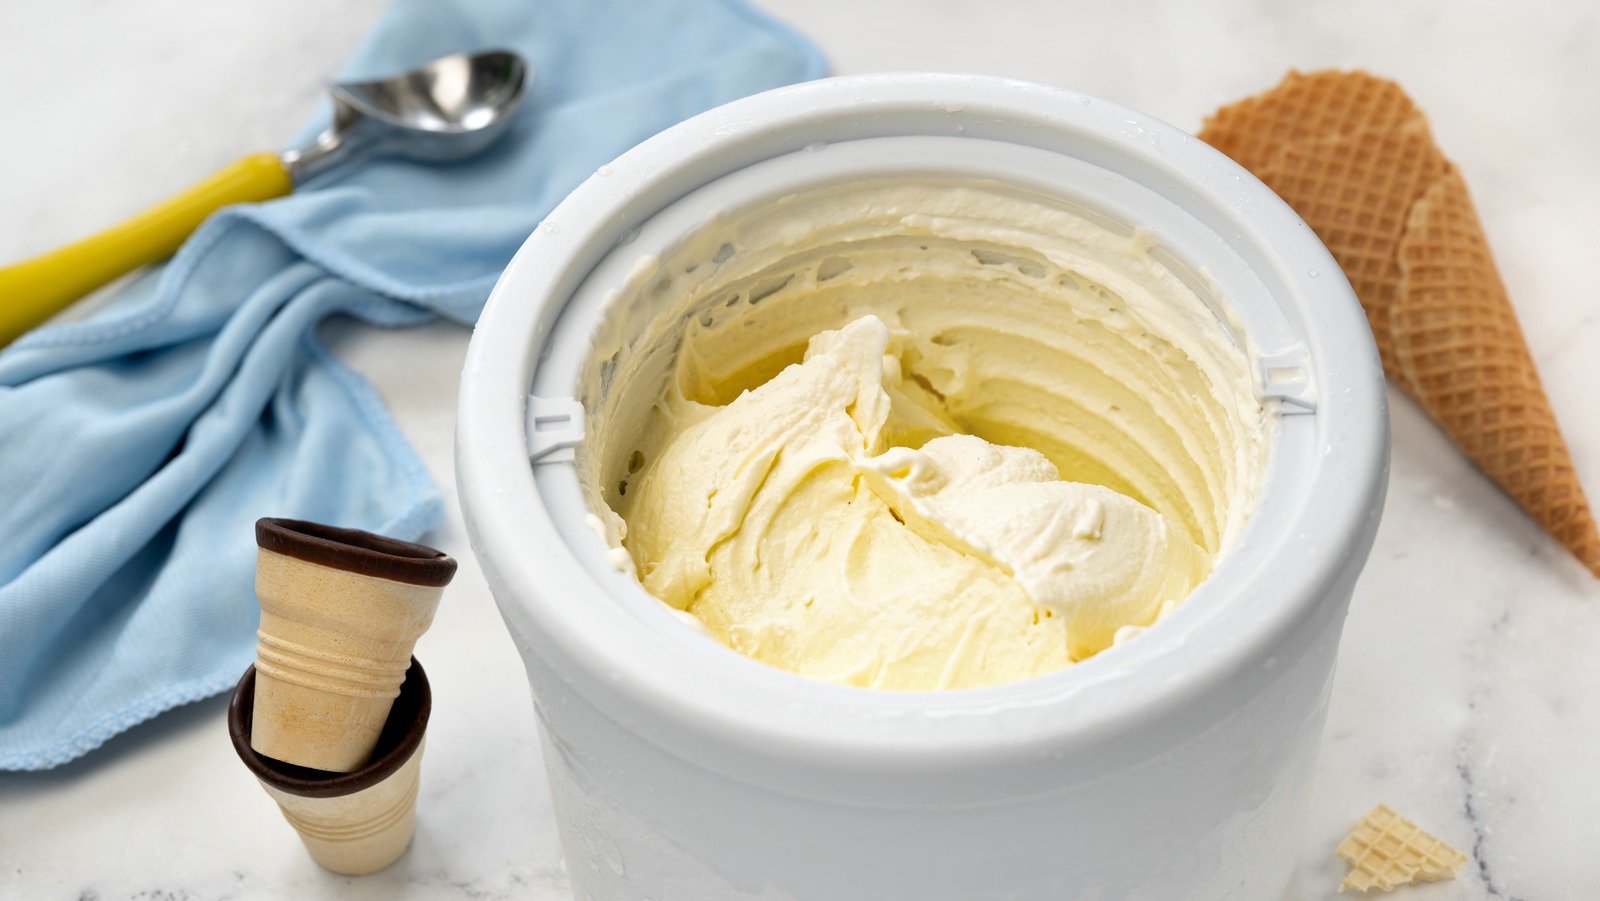 https://www.thedailymeal.com/img/gallery/16-tasty-tips-for-making-homemade-ice-cream/l-intro-1688057548.jpg